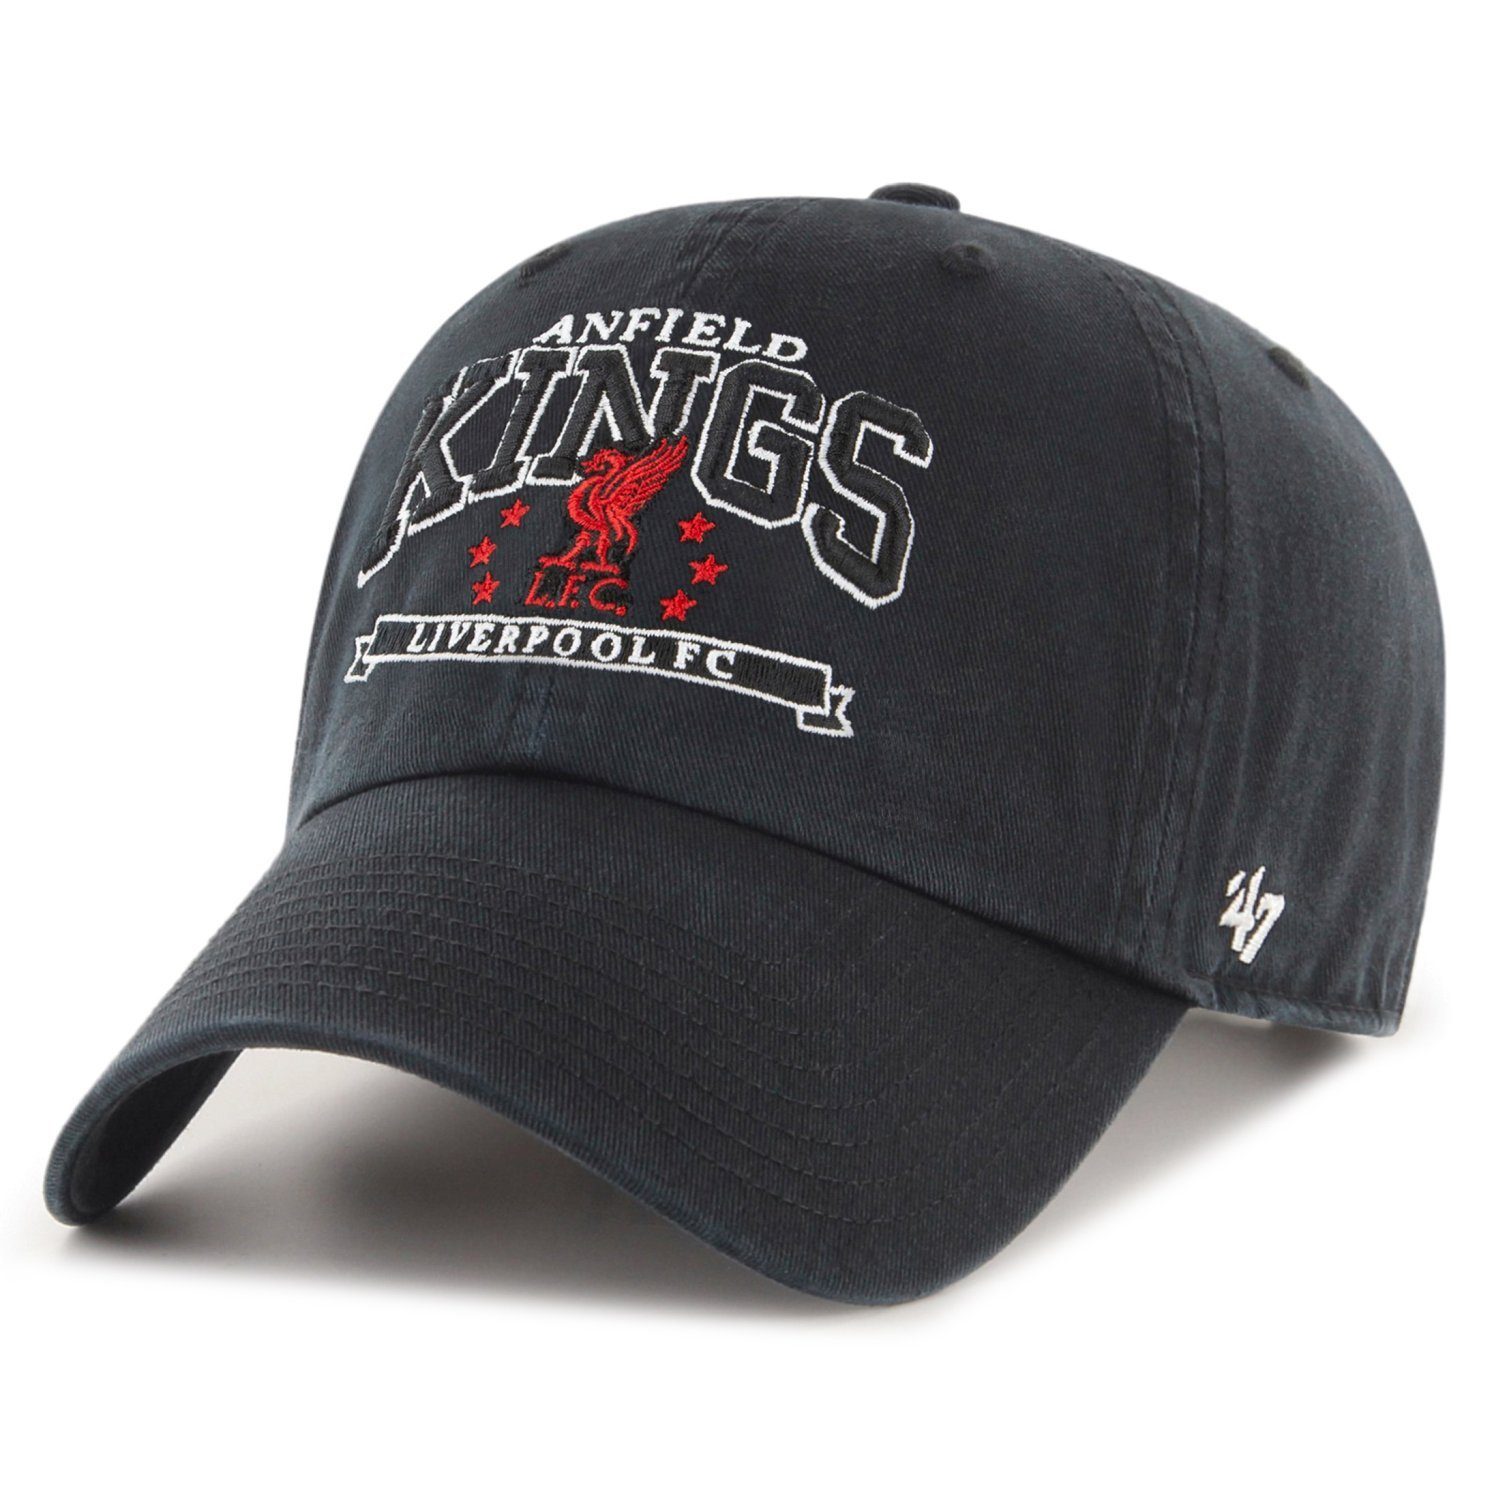 '47 Brand Trucker Cap Relaxed Fit FC Liverpool Anfield Kings | Trucker Caps